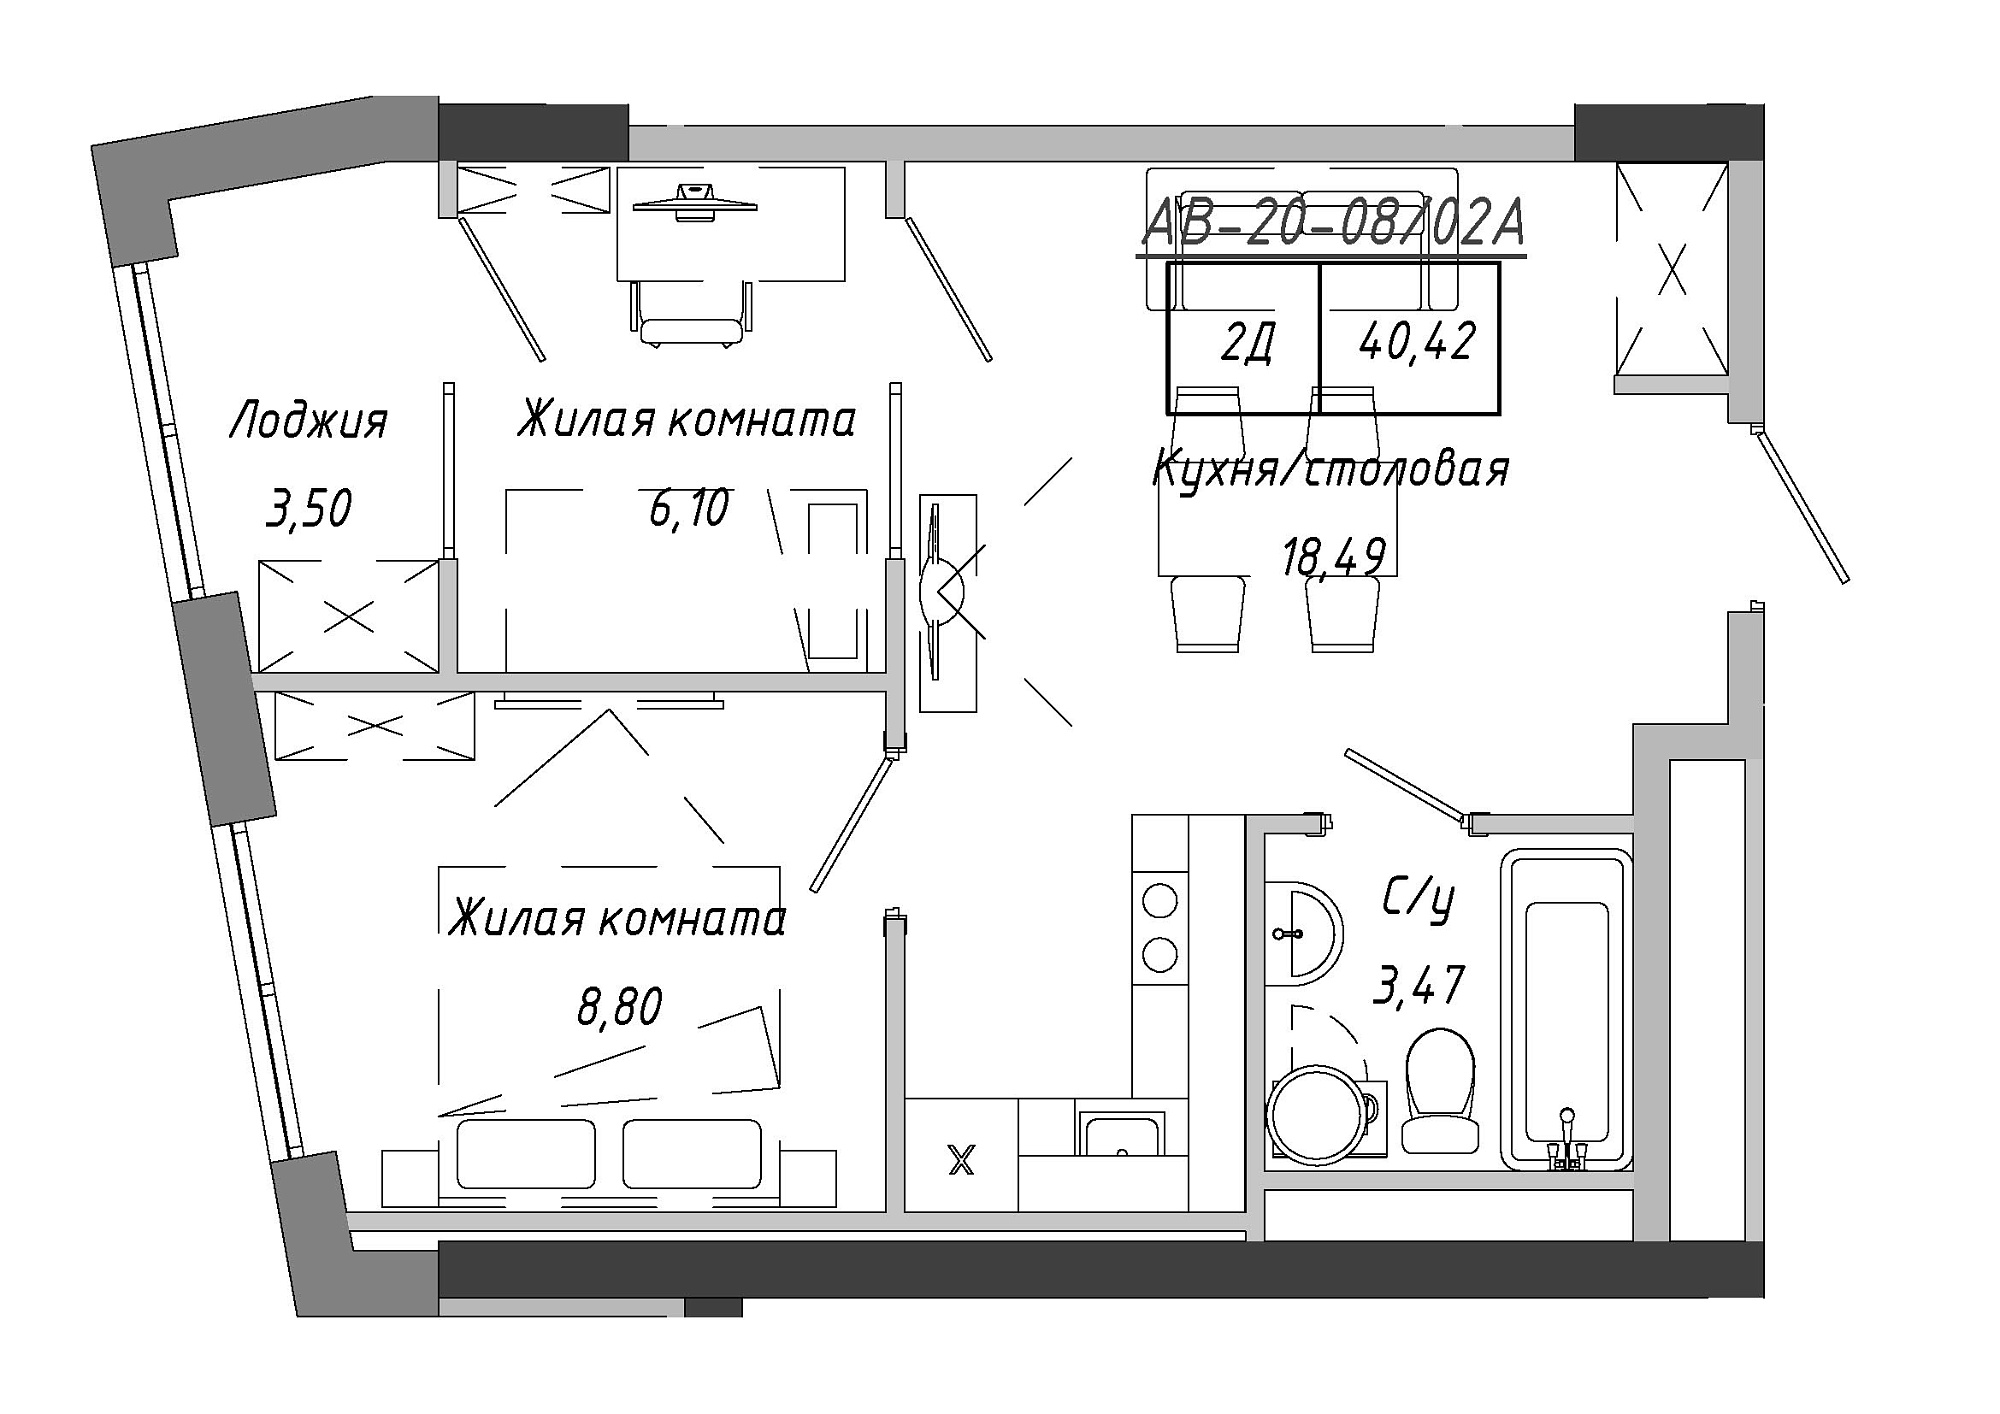 Planning 2-rm flats area 41.9m2, AB-20-08/0002а.